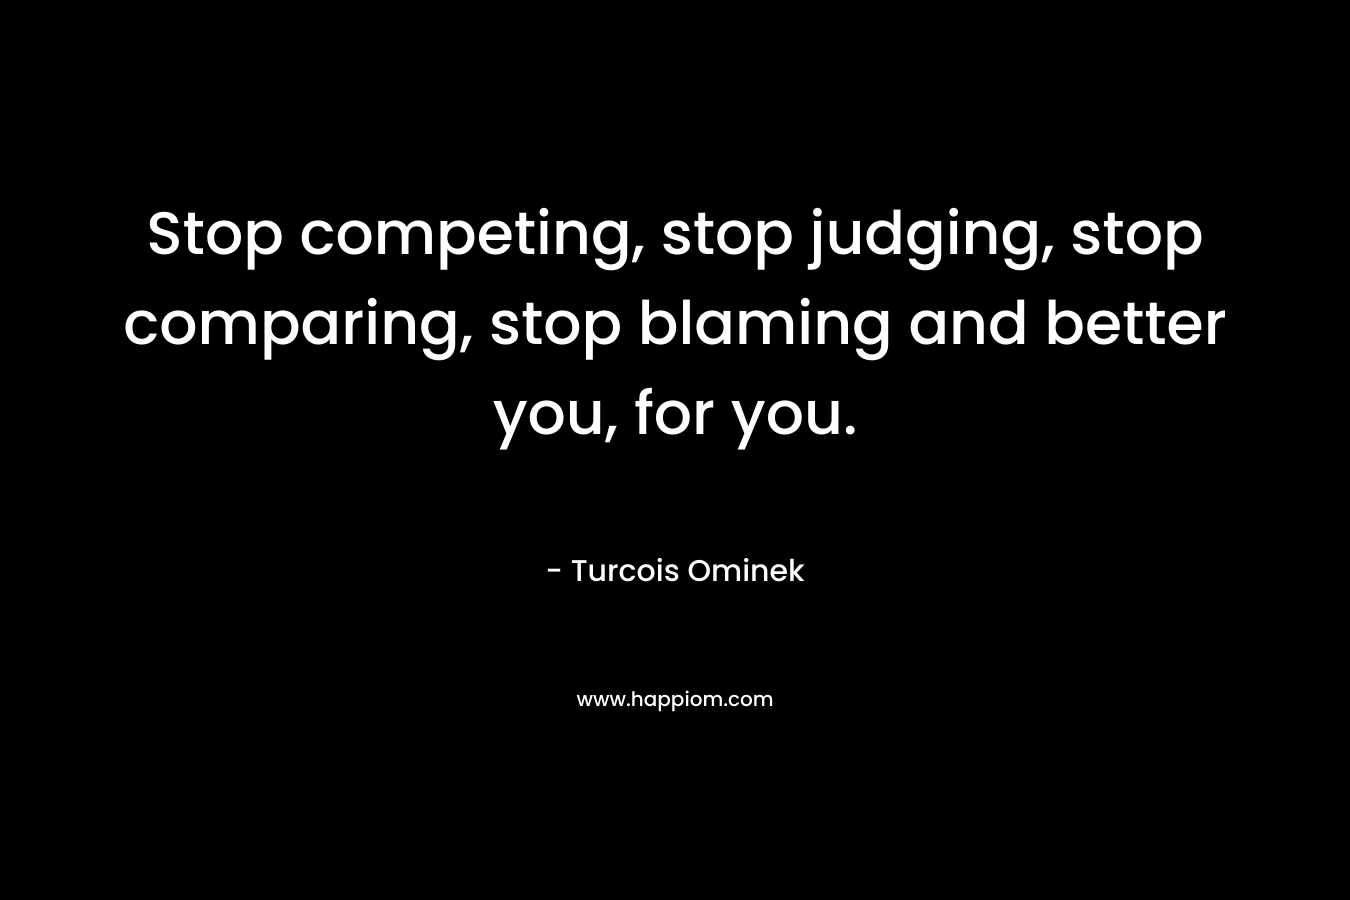 Stop competing, stop judging, stop comparing, stop blaming and better you, for you. – Turcois Ominek